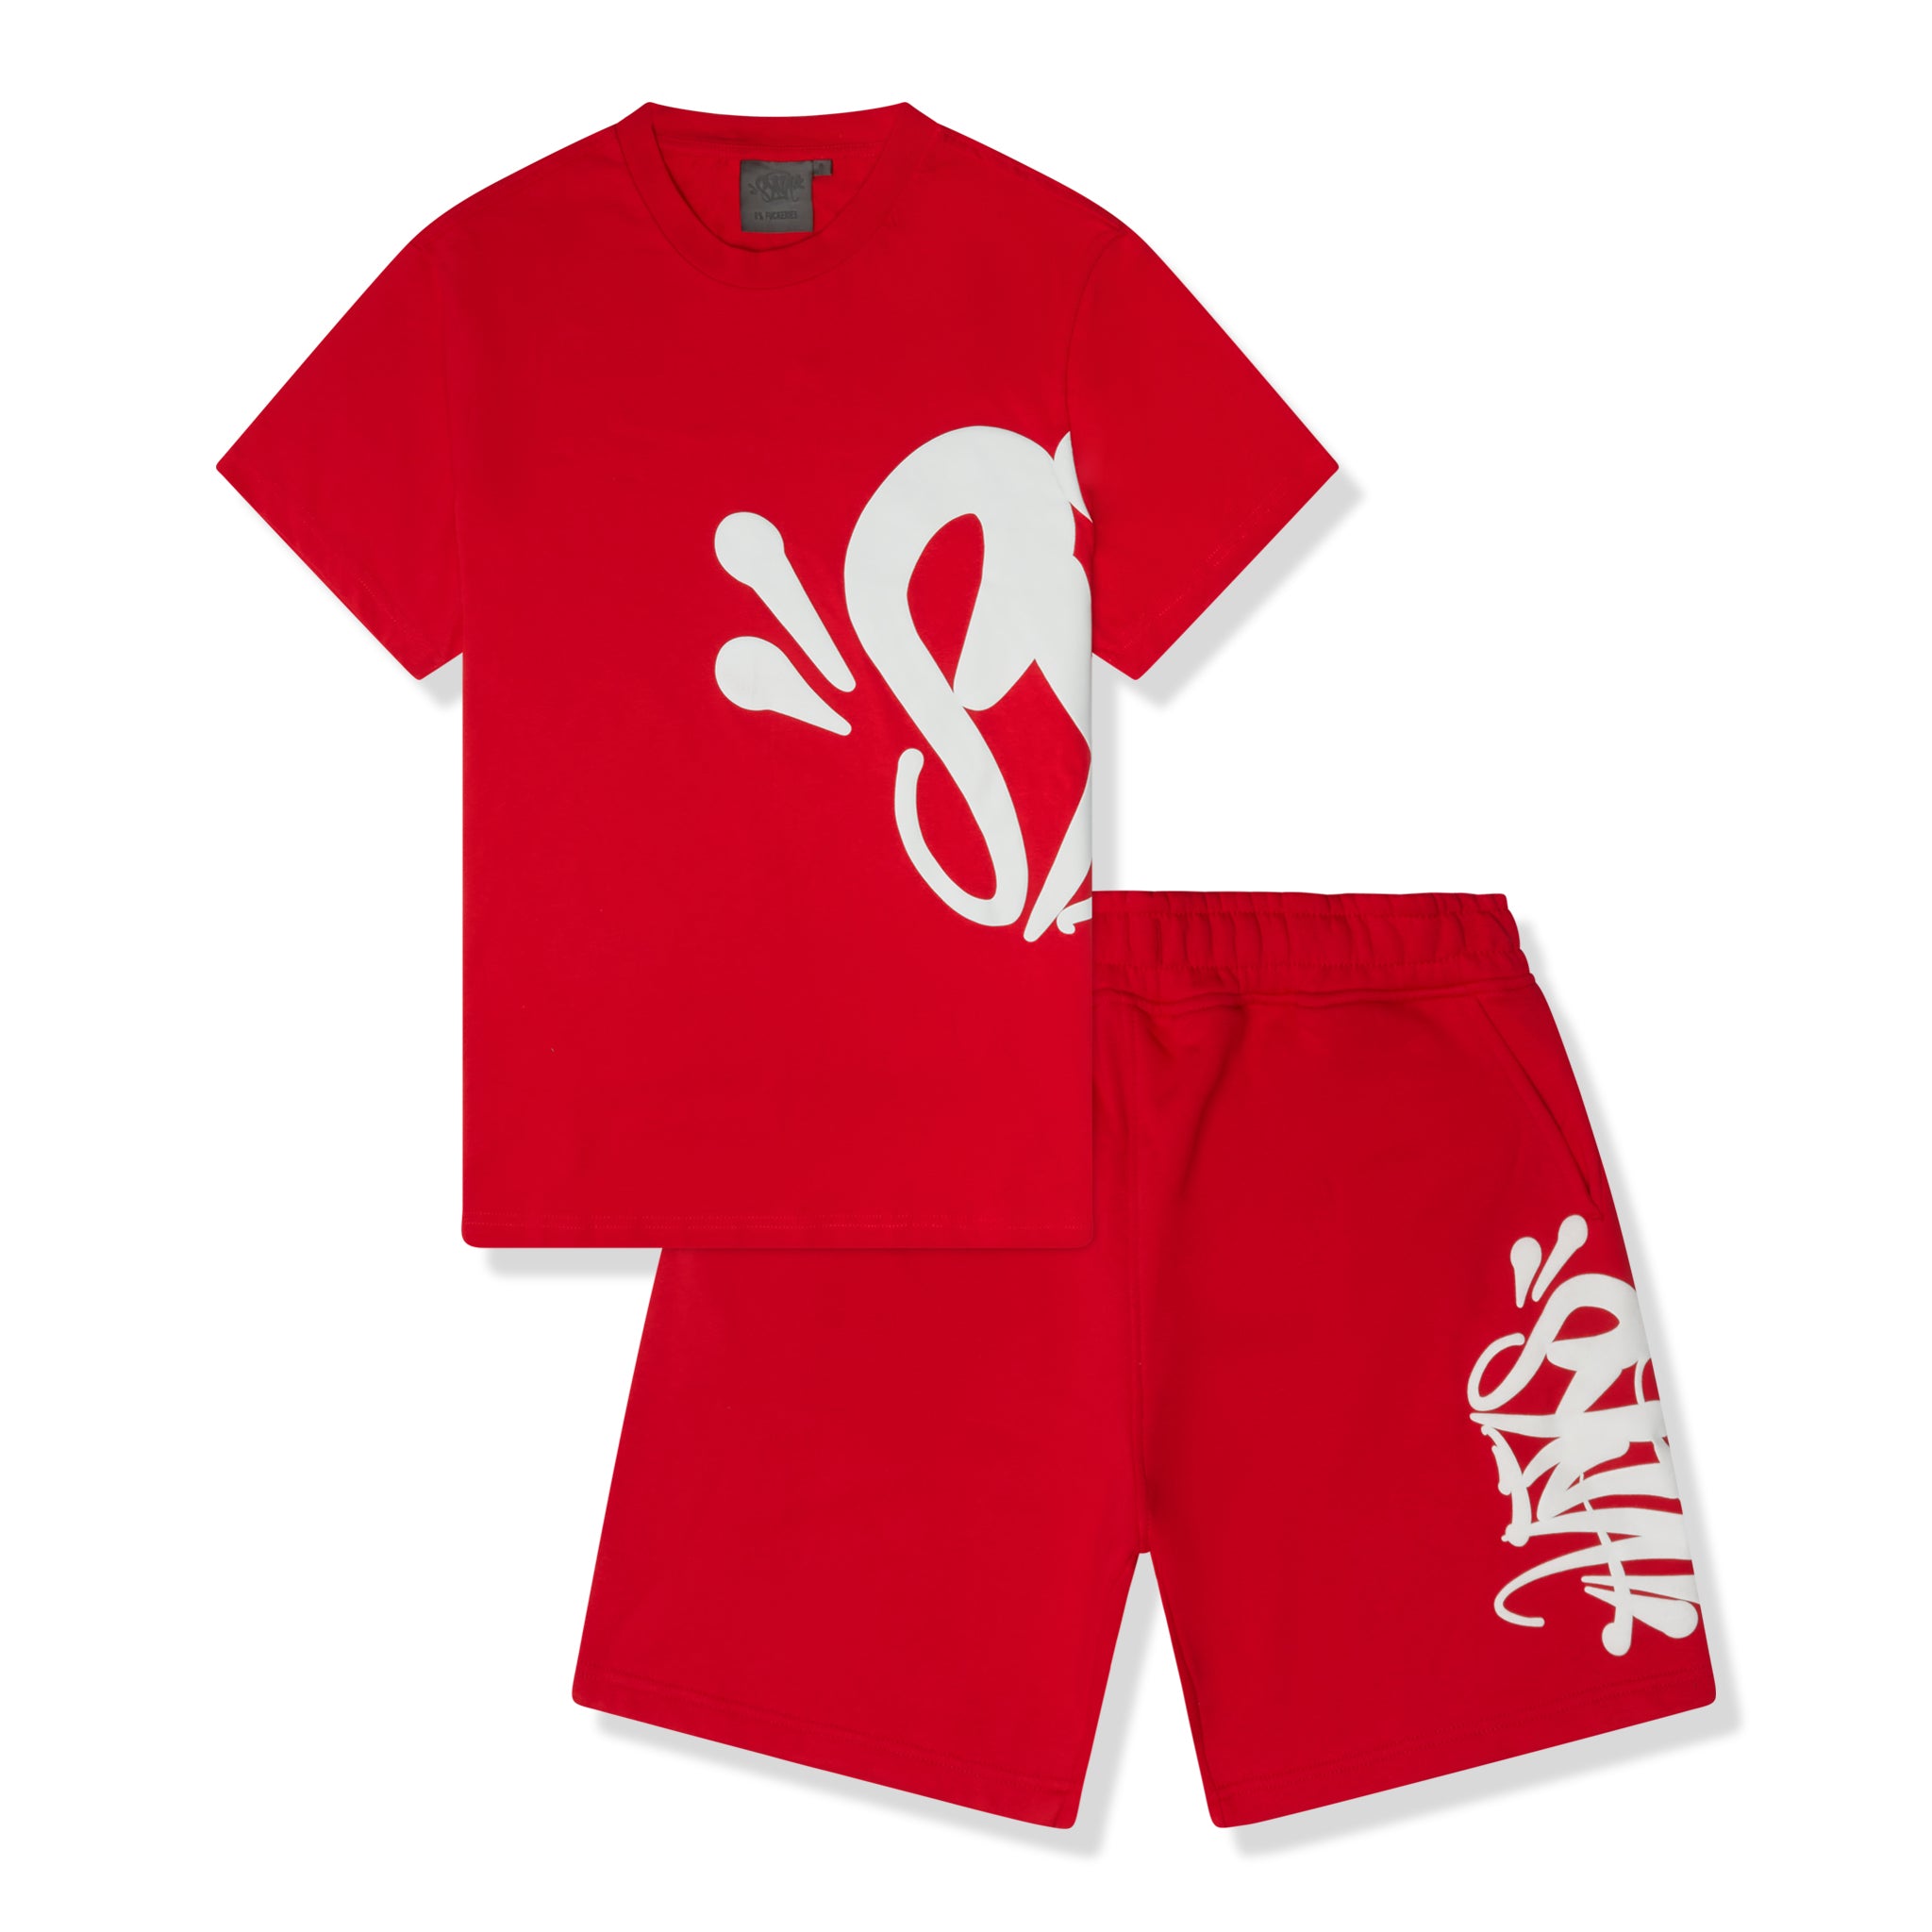 Front view of Syna World Team Syna Twinset Red T-Shirt & Shorts 